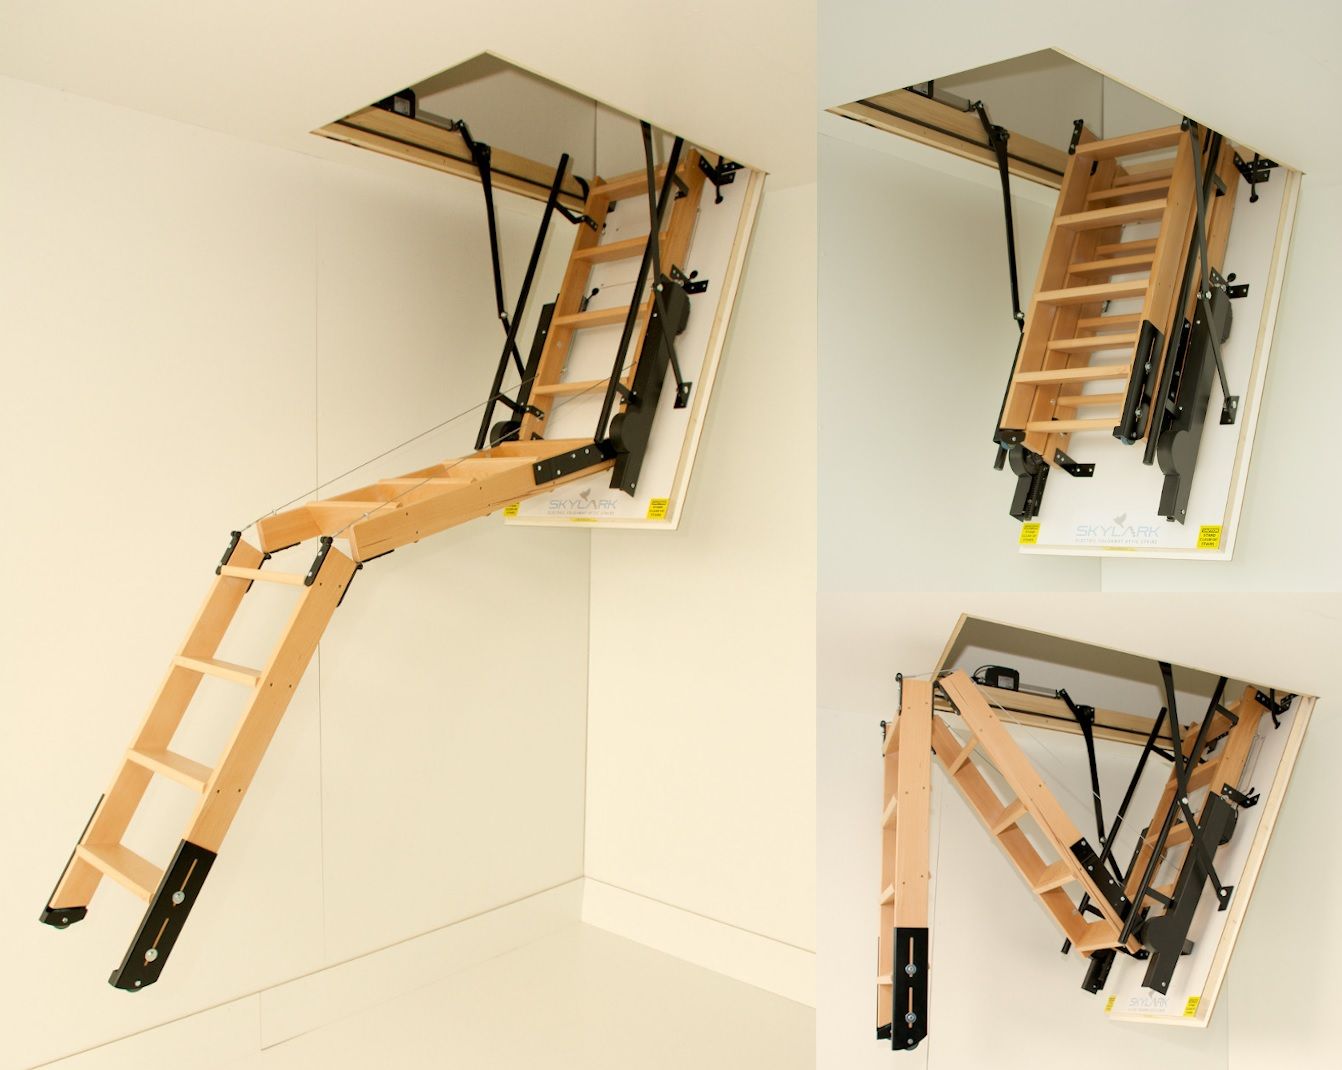 What are the advantages of installing a Loft Ladder?